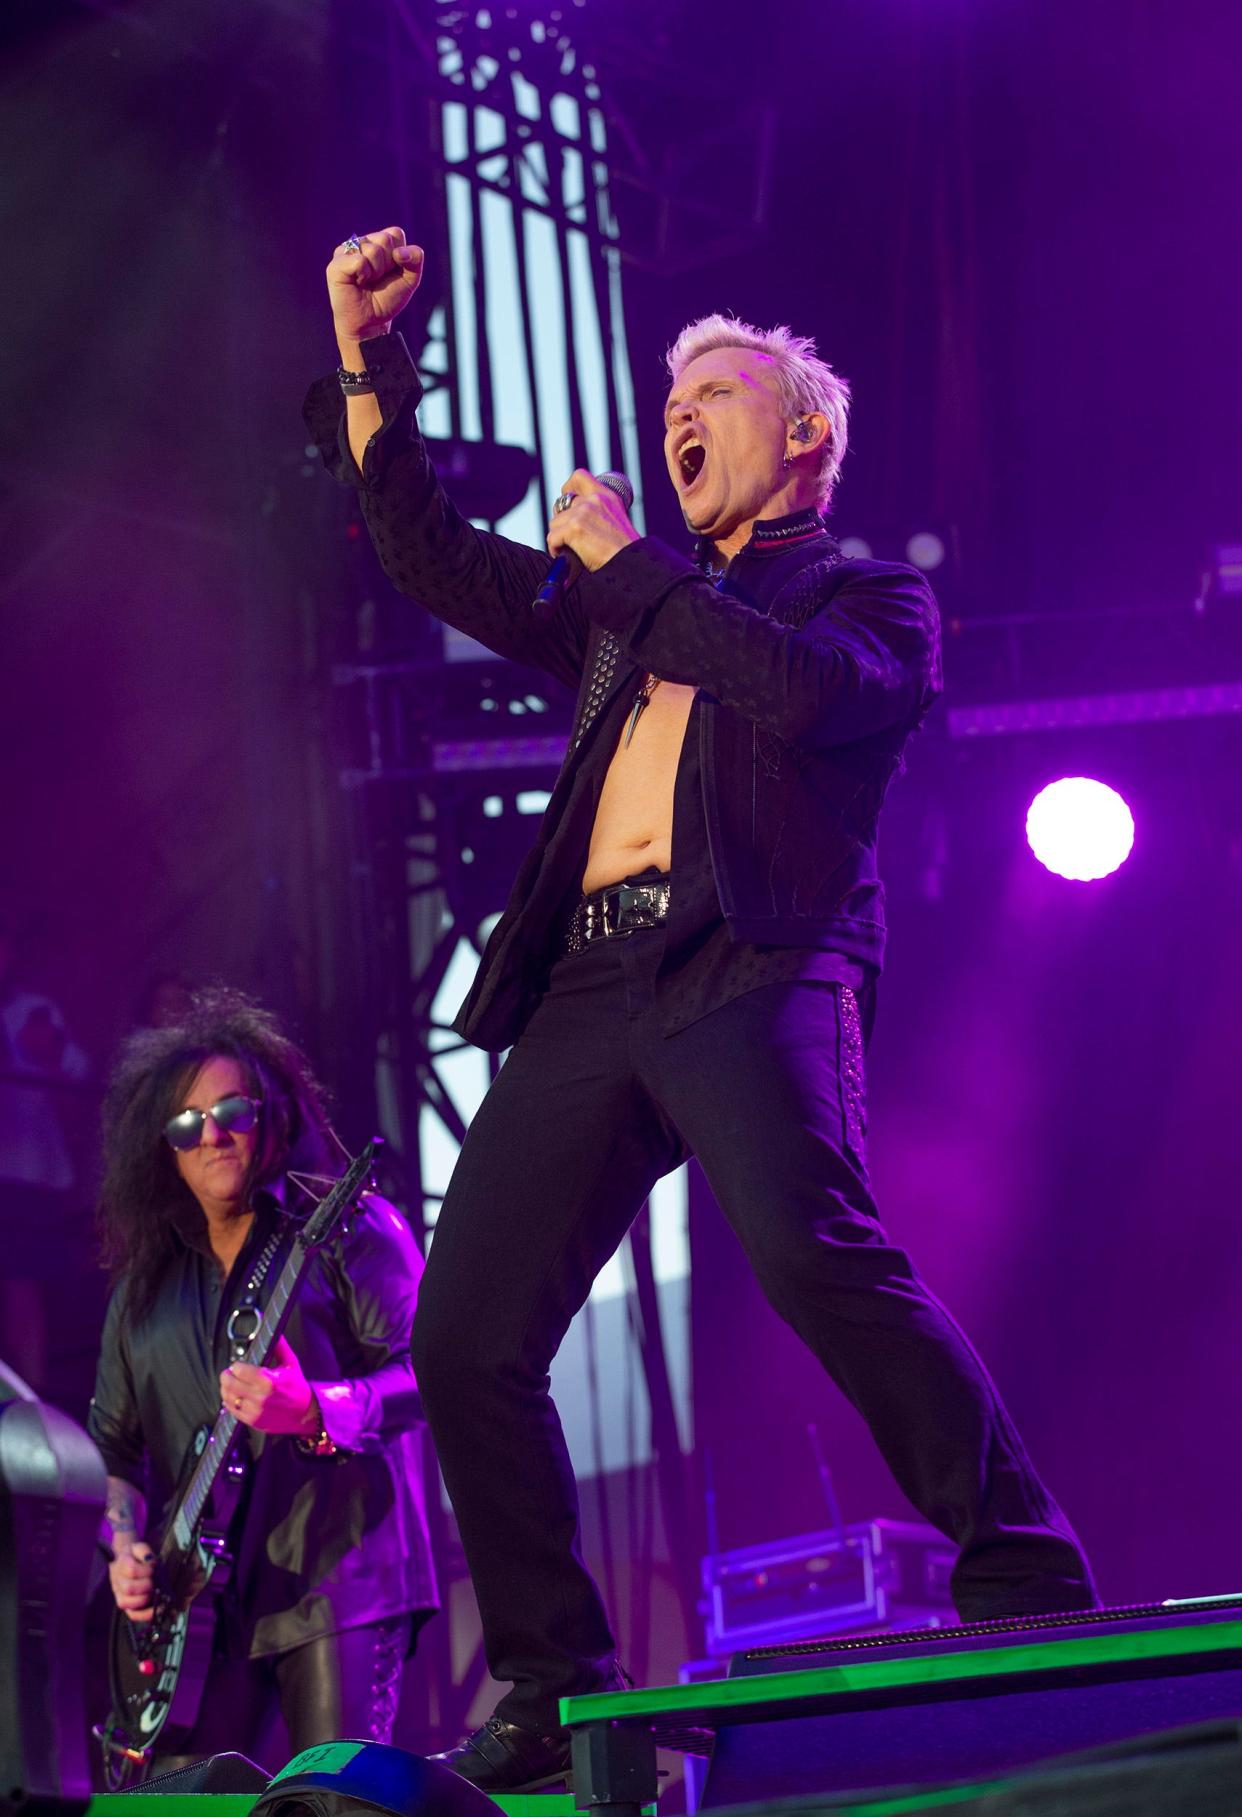 Billy Idol comes to PNC Pavilion on May 6. Tickets go on sale Friday.